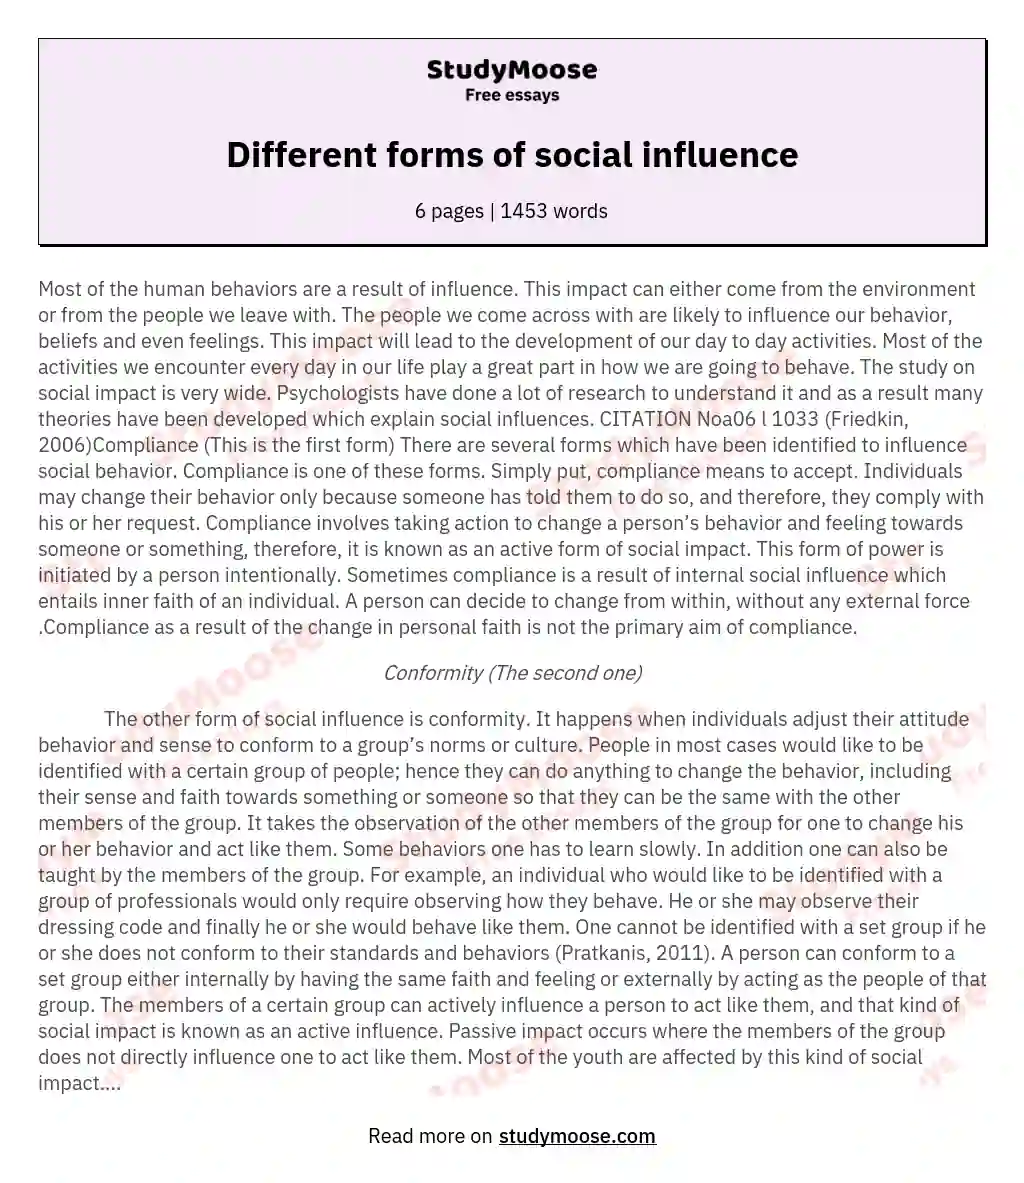 Different forms of social influence essay